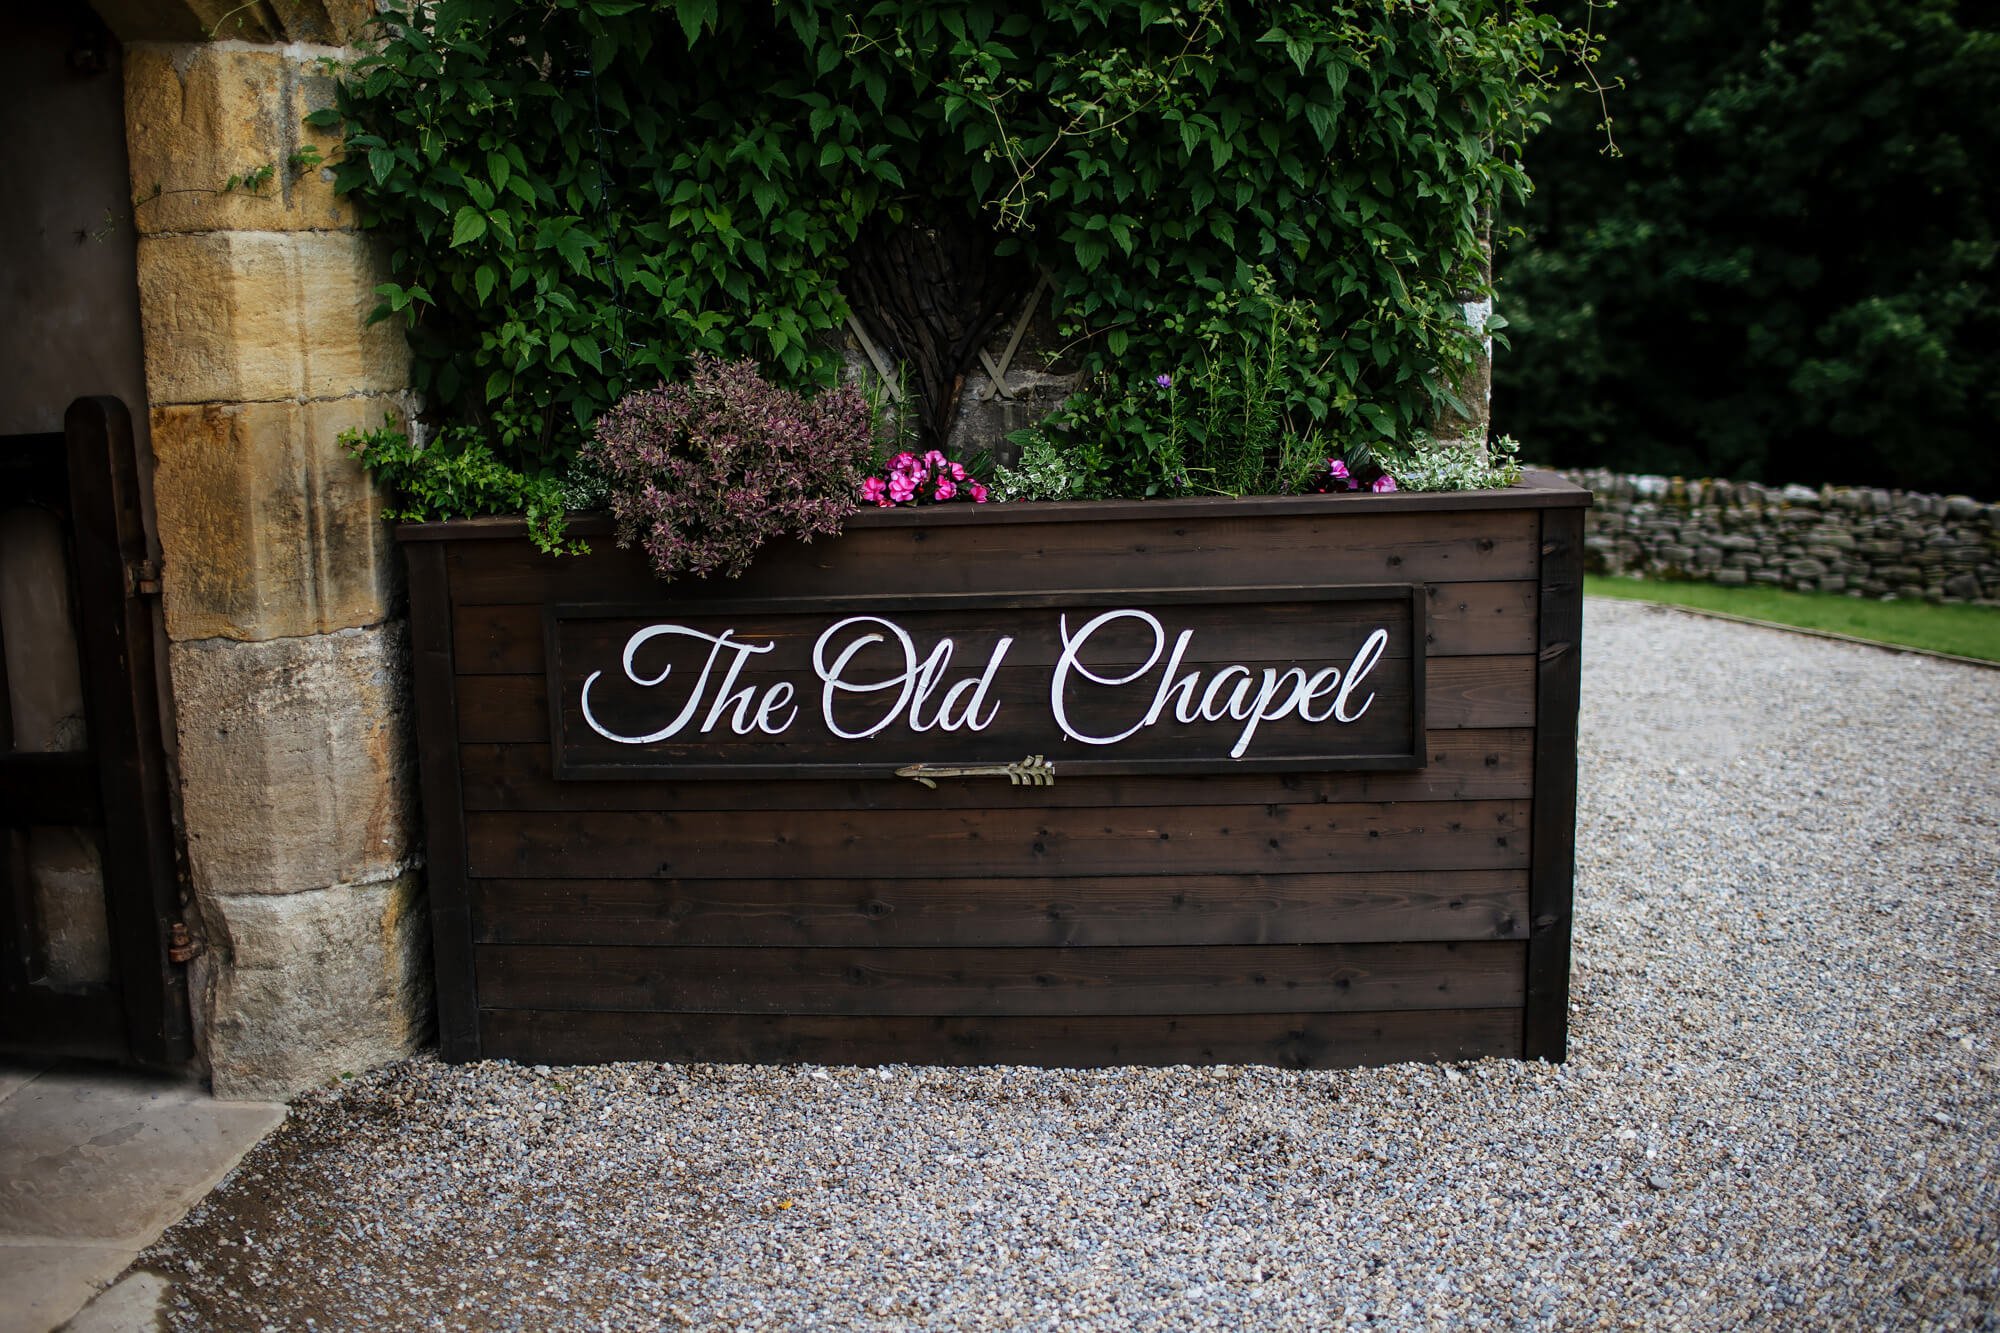 The Old Chapel sign at The Priests House